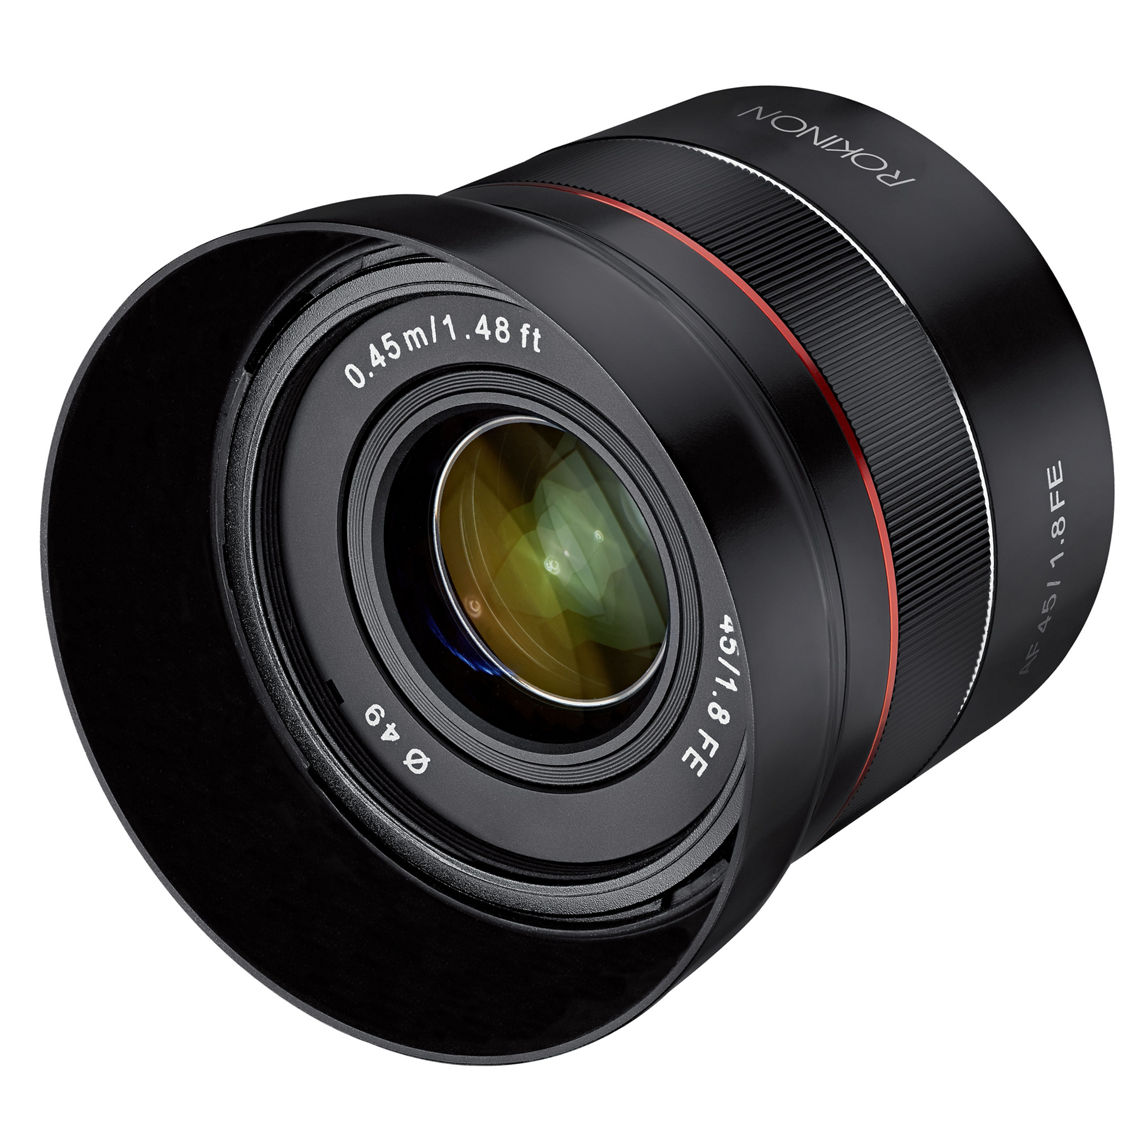 Rokinon 45mm F1.8 AF Full Frame Compact Lens for Sony E Mount - Image 3 of 5